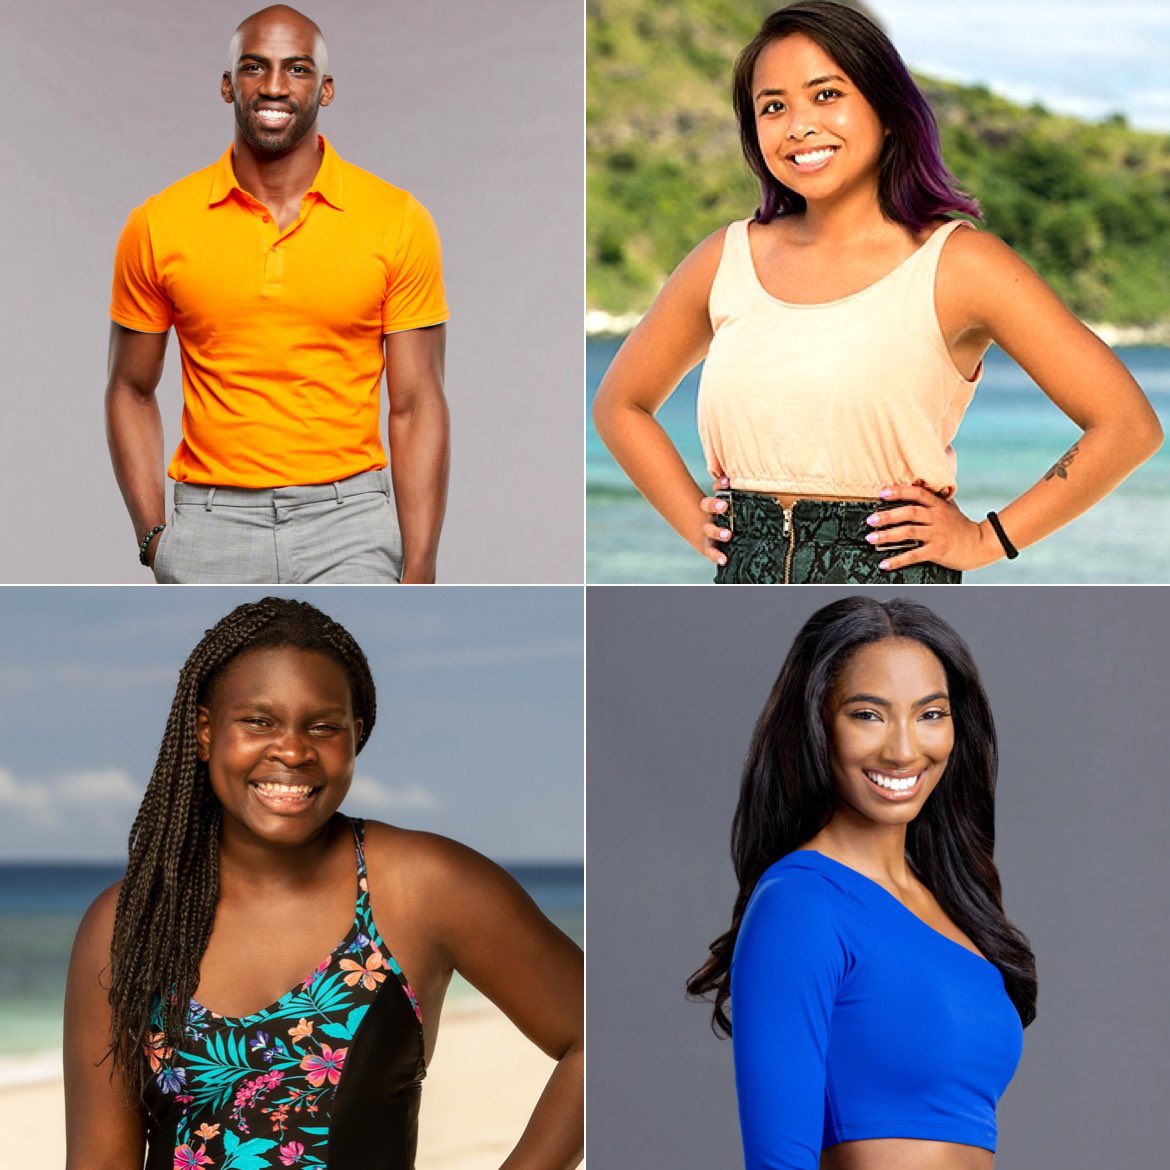 BIPOC players have won each season of ‘Big Brother’ and ‘Survivor’ since a diversity initiative was set by CBS in 2020 to have at least 50% of all casts be inclusive: #BB23 - Xavier Prather #Survivor 41 - Erika Casupanan #Survivor 42 - Maryanne Oketch #BB24 - Taylor Hale